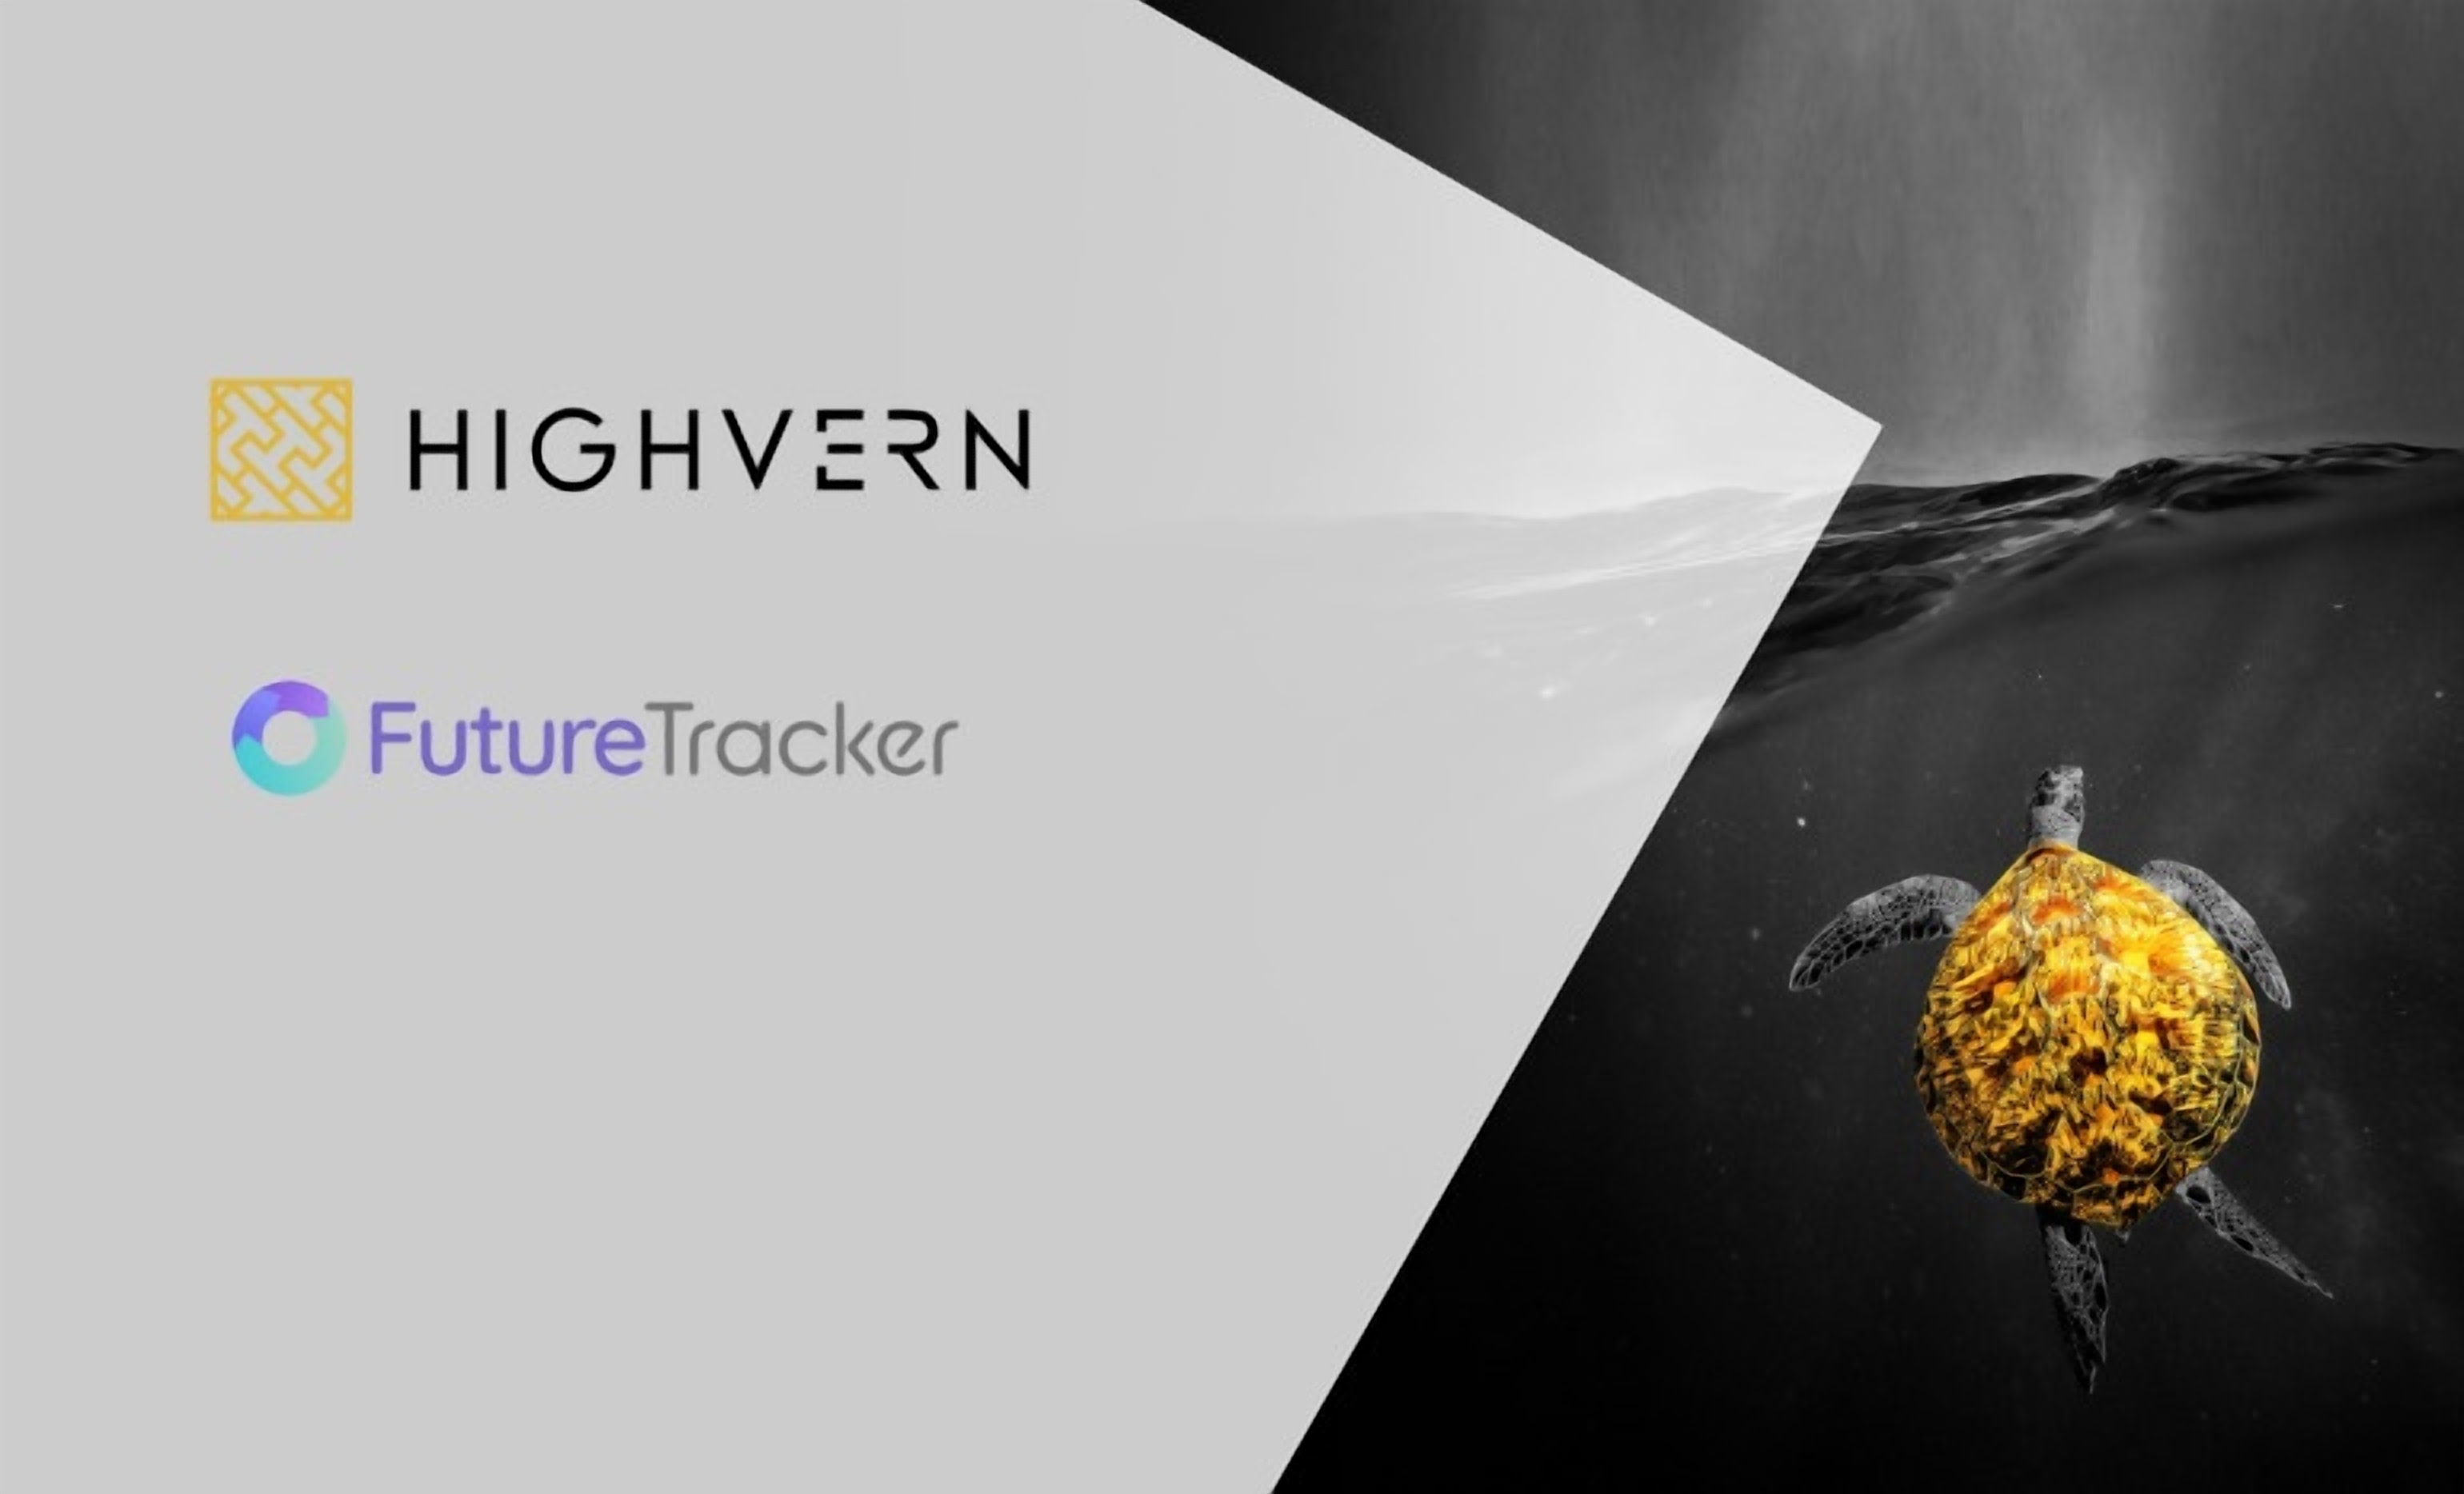 KnowESG_Highvern Teams Up with FutureTracker for Sustainability | ESG for Business